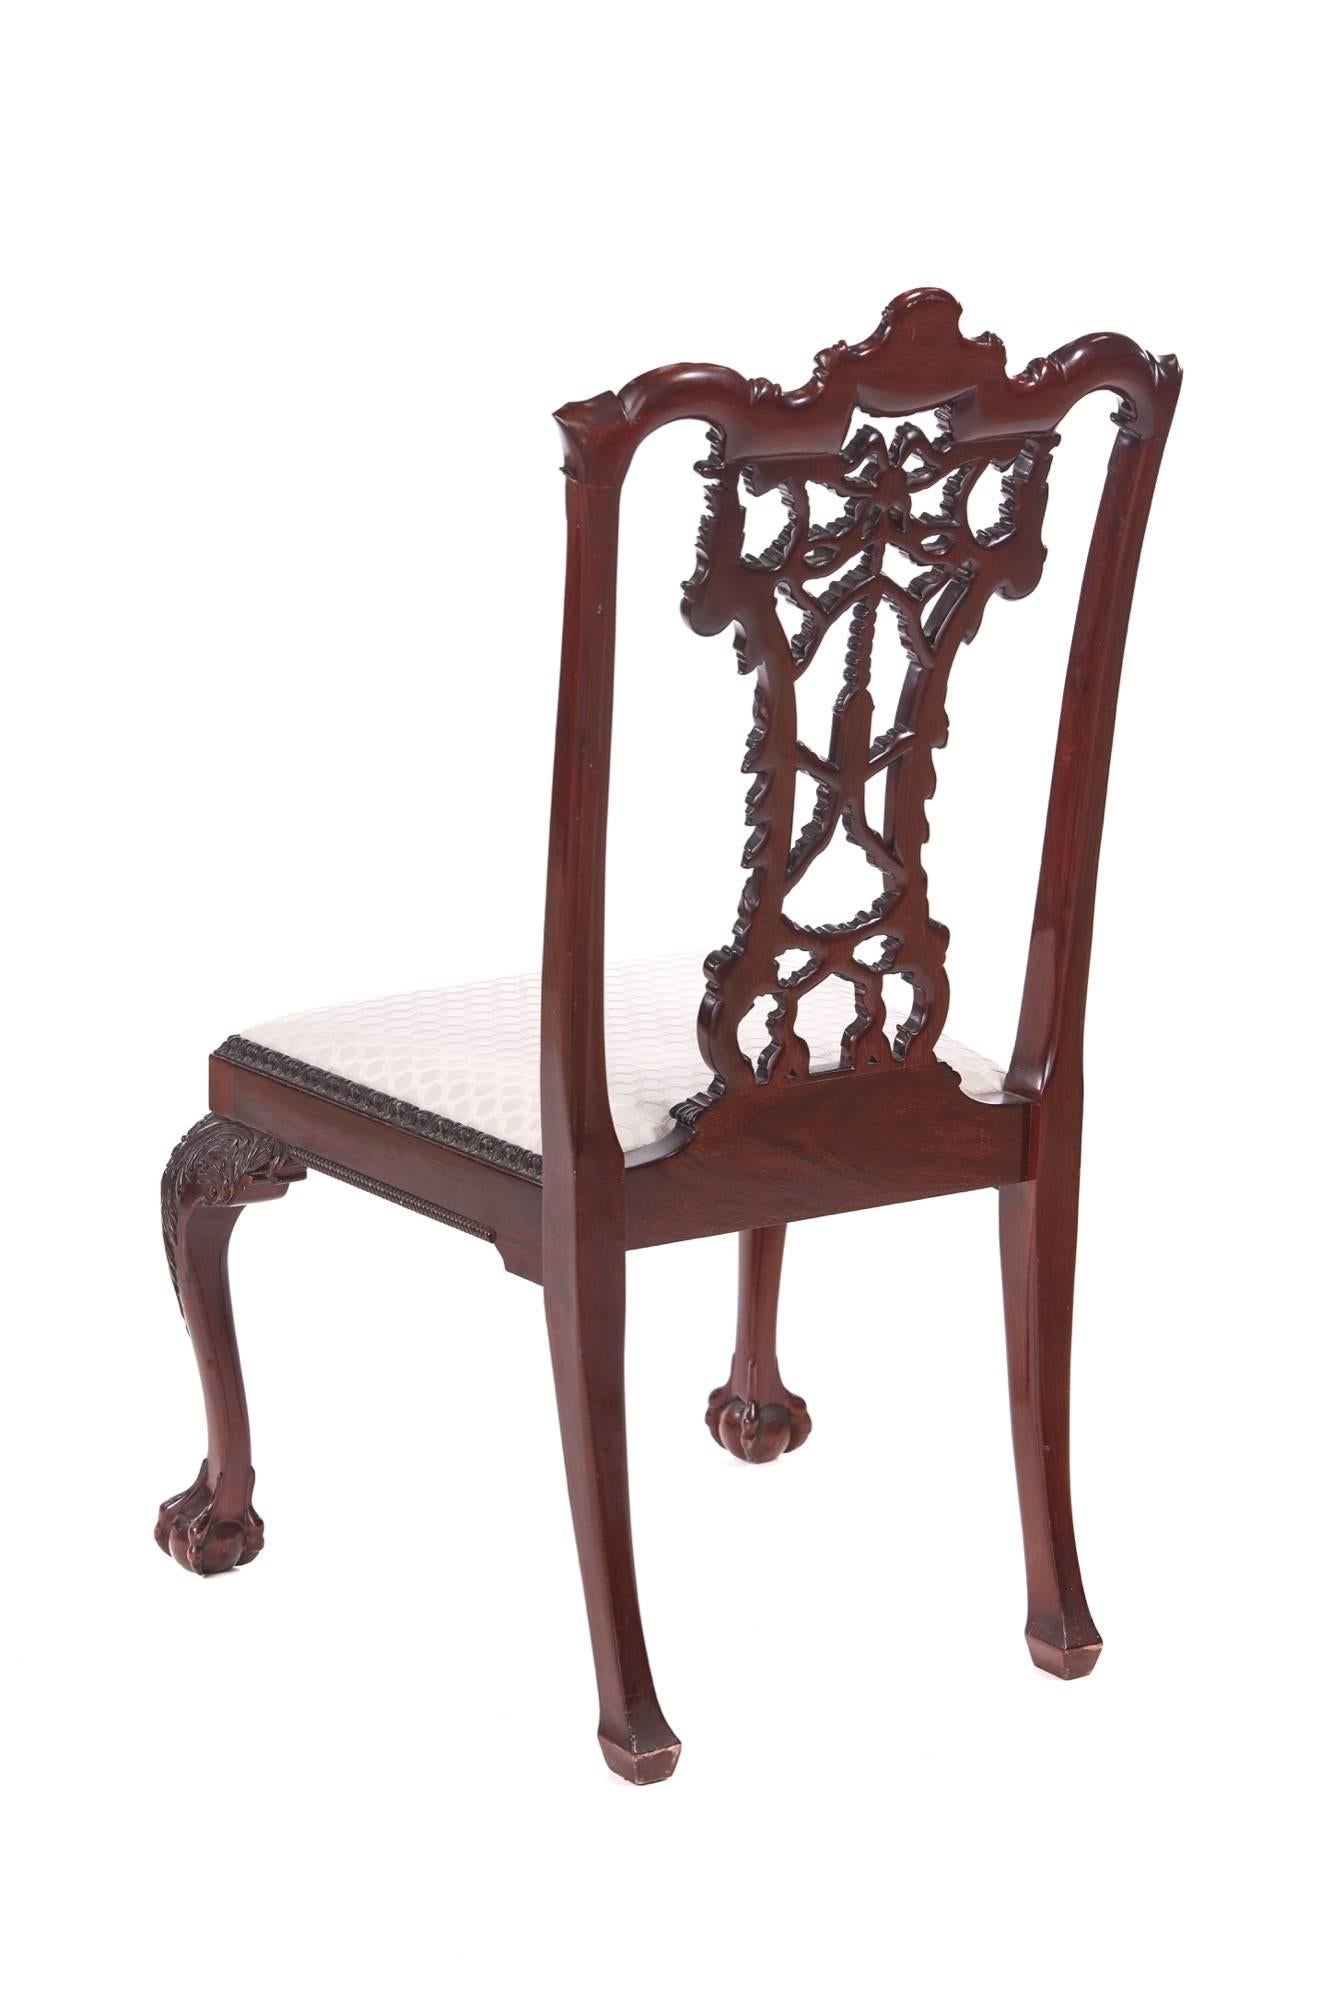 Outstanding antique carved mahogany desk chair, with a fantastic carved ribbon back, open splat centred by tassel, drop in seat, standing on lovely leaf scroll carved cabriole legs with claw and ball feet to the front outswept back legs.